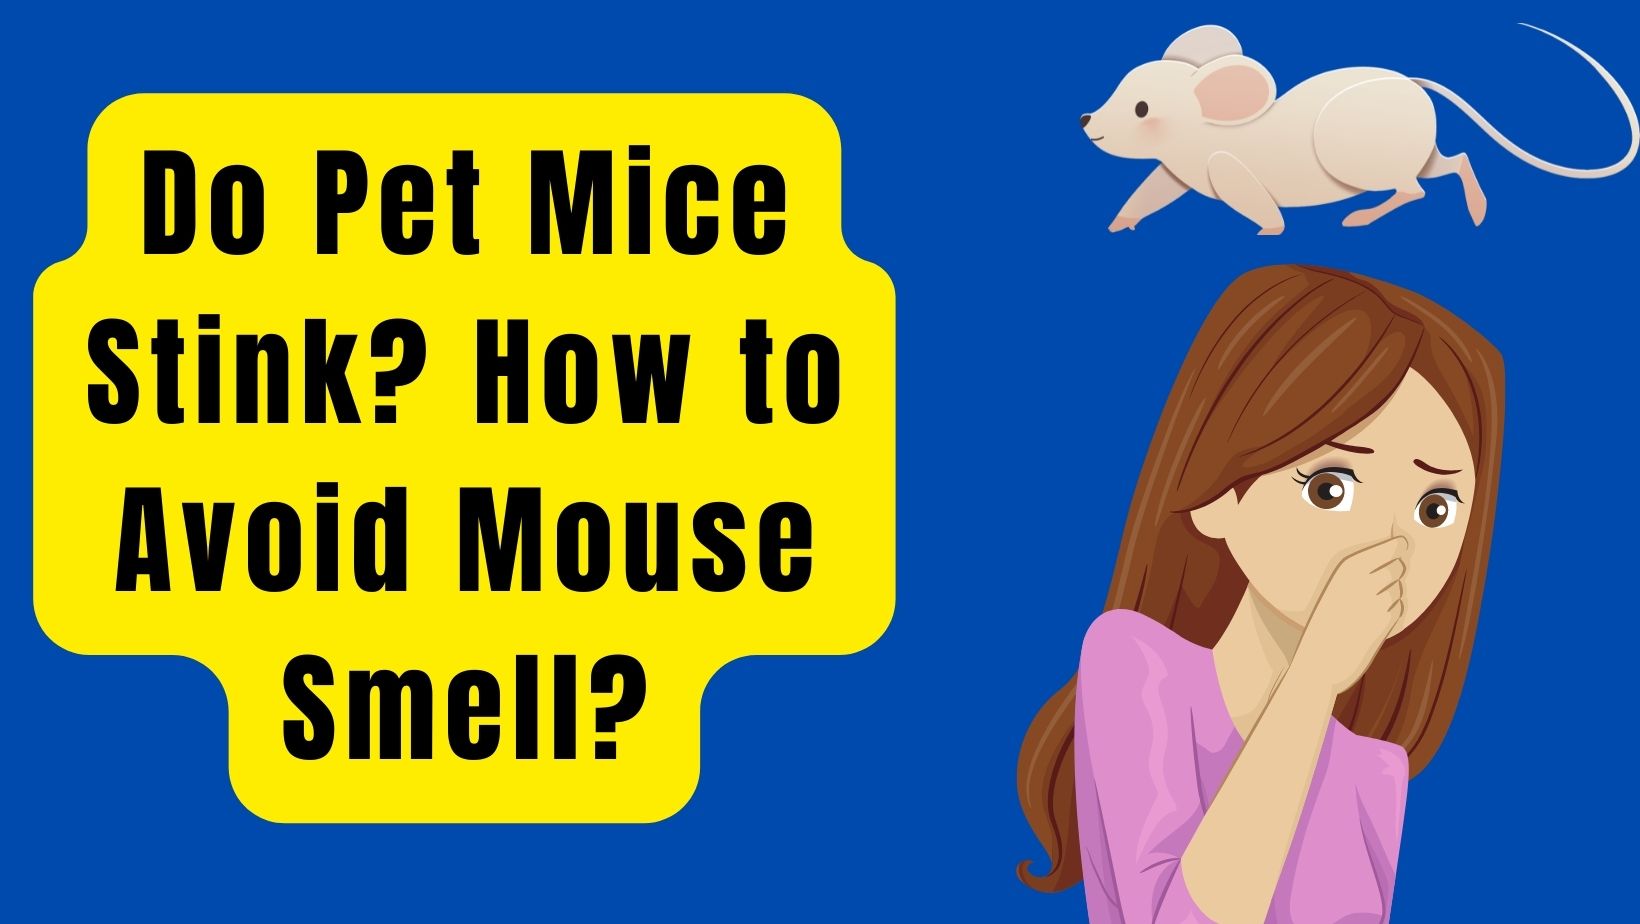 Do Pet Mice Stink How to Avoid Mouse Smell